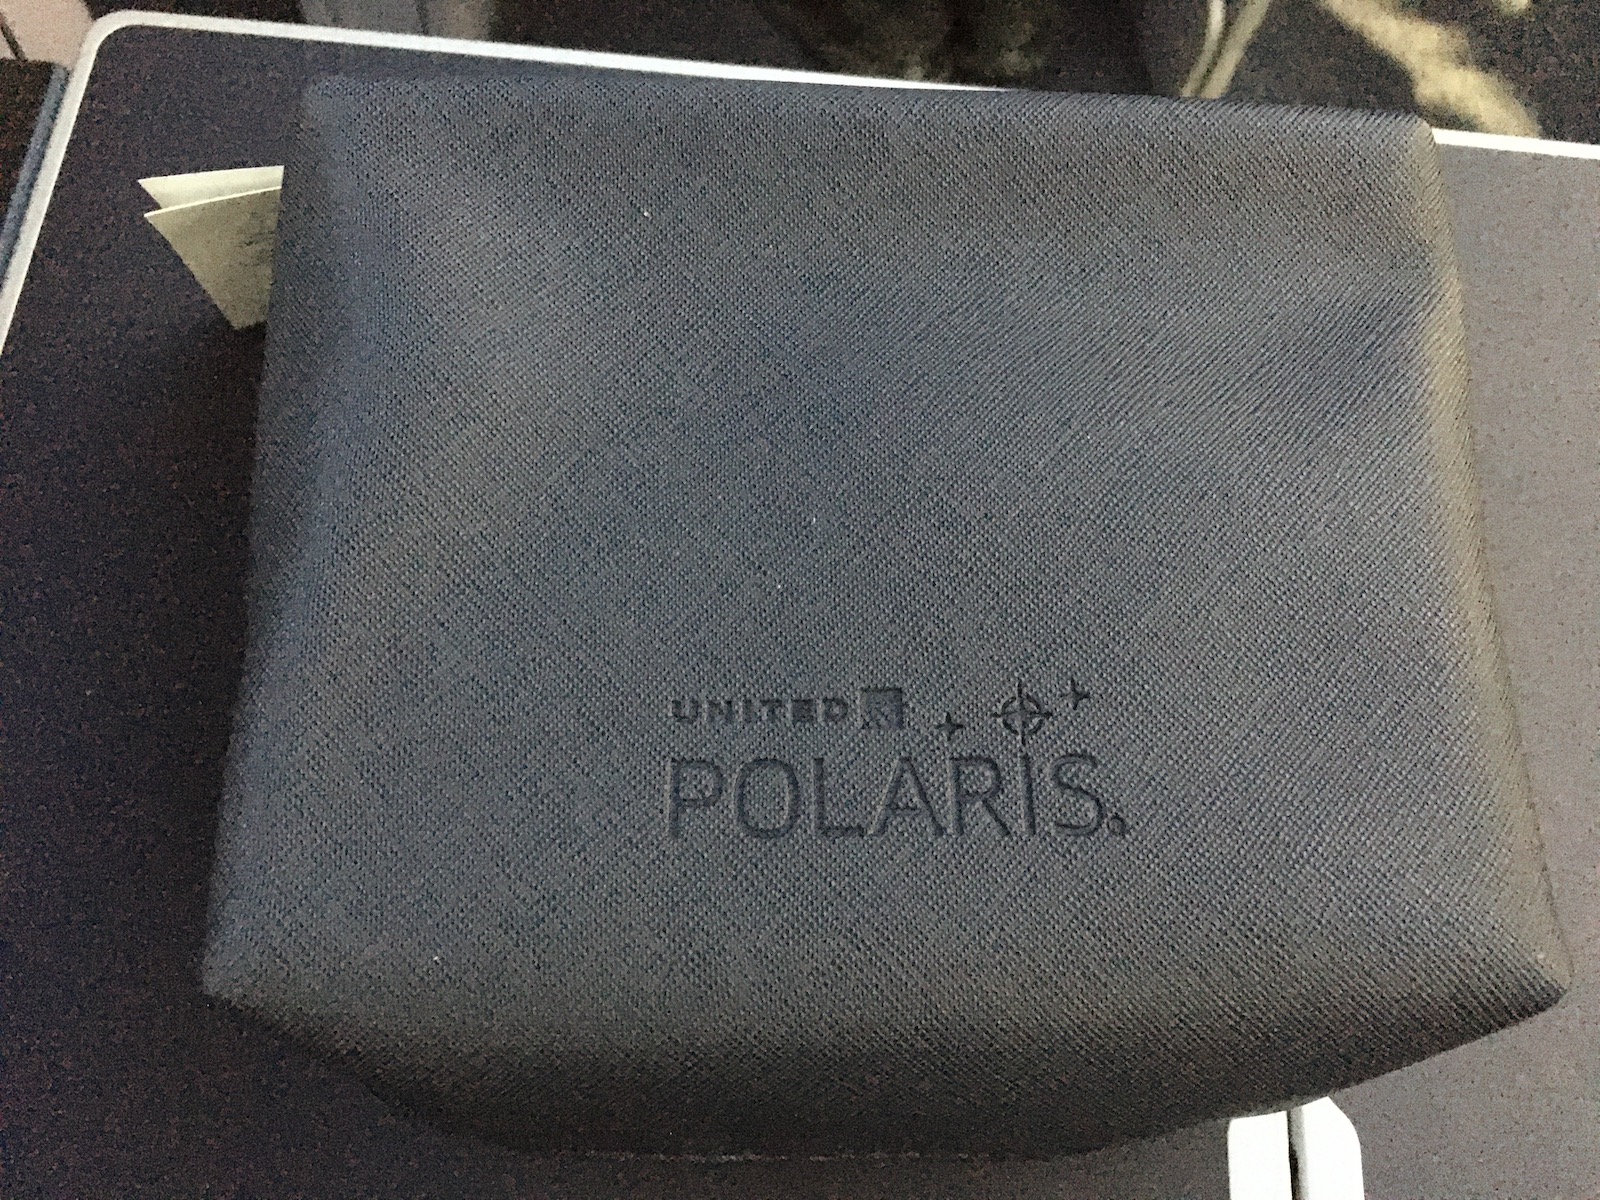 United Polaris business class review - amenity kit